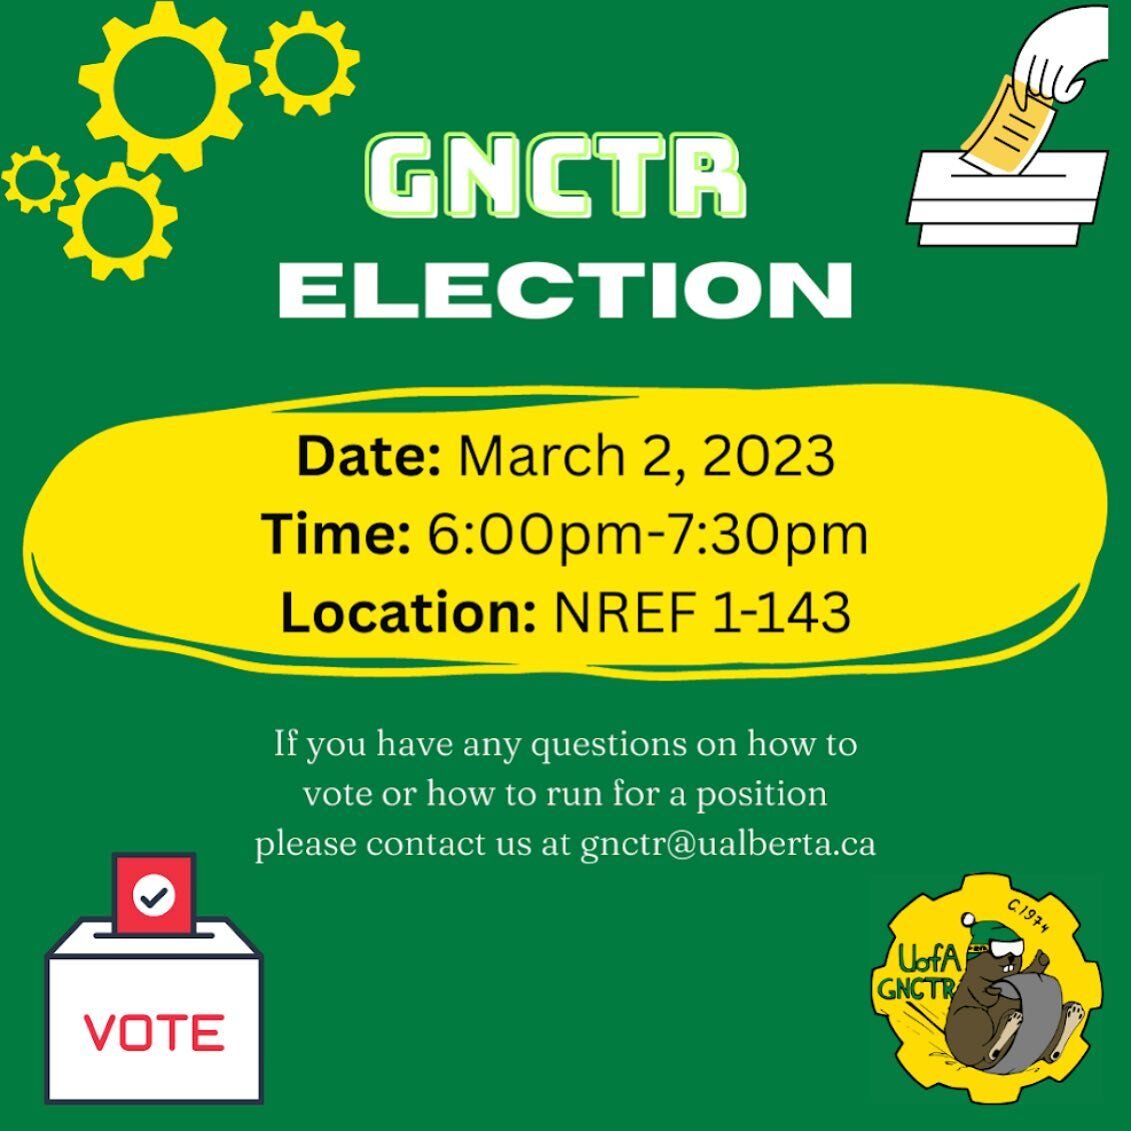 We are having our election!! If you have any questions about the voting procedure or how to run for a position please DM us or email us!